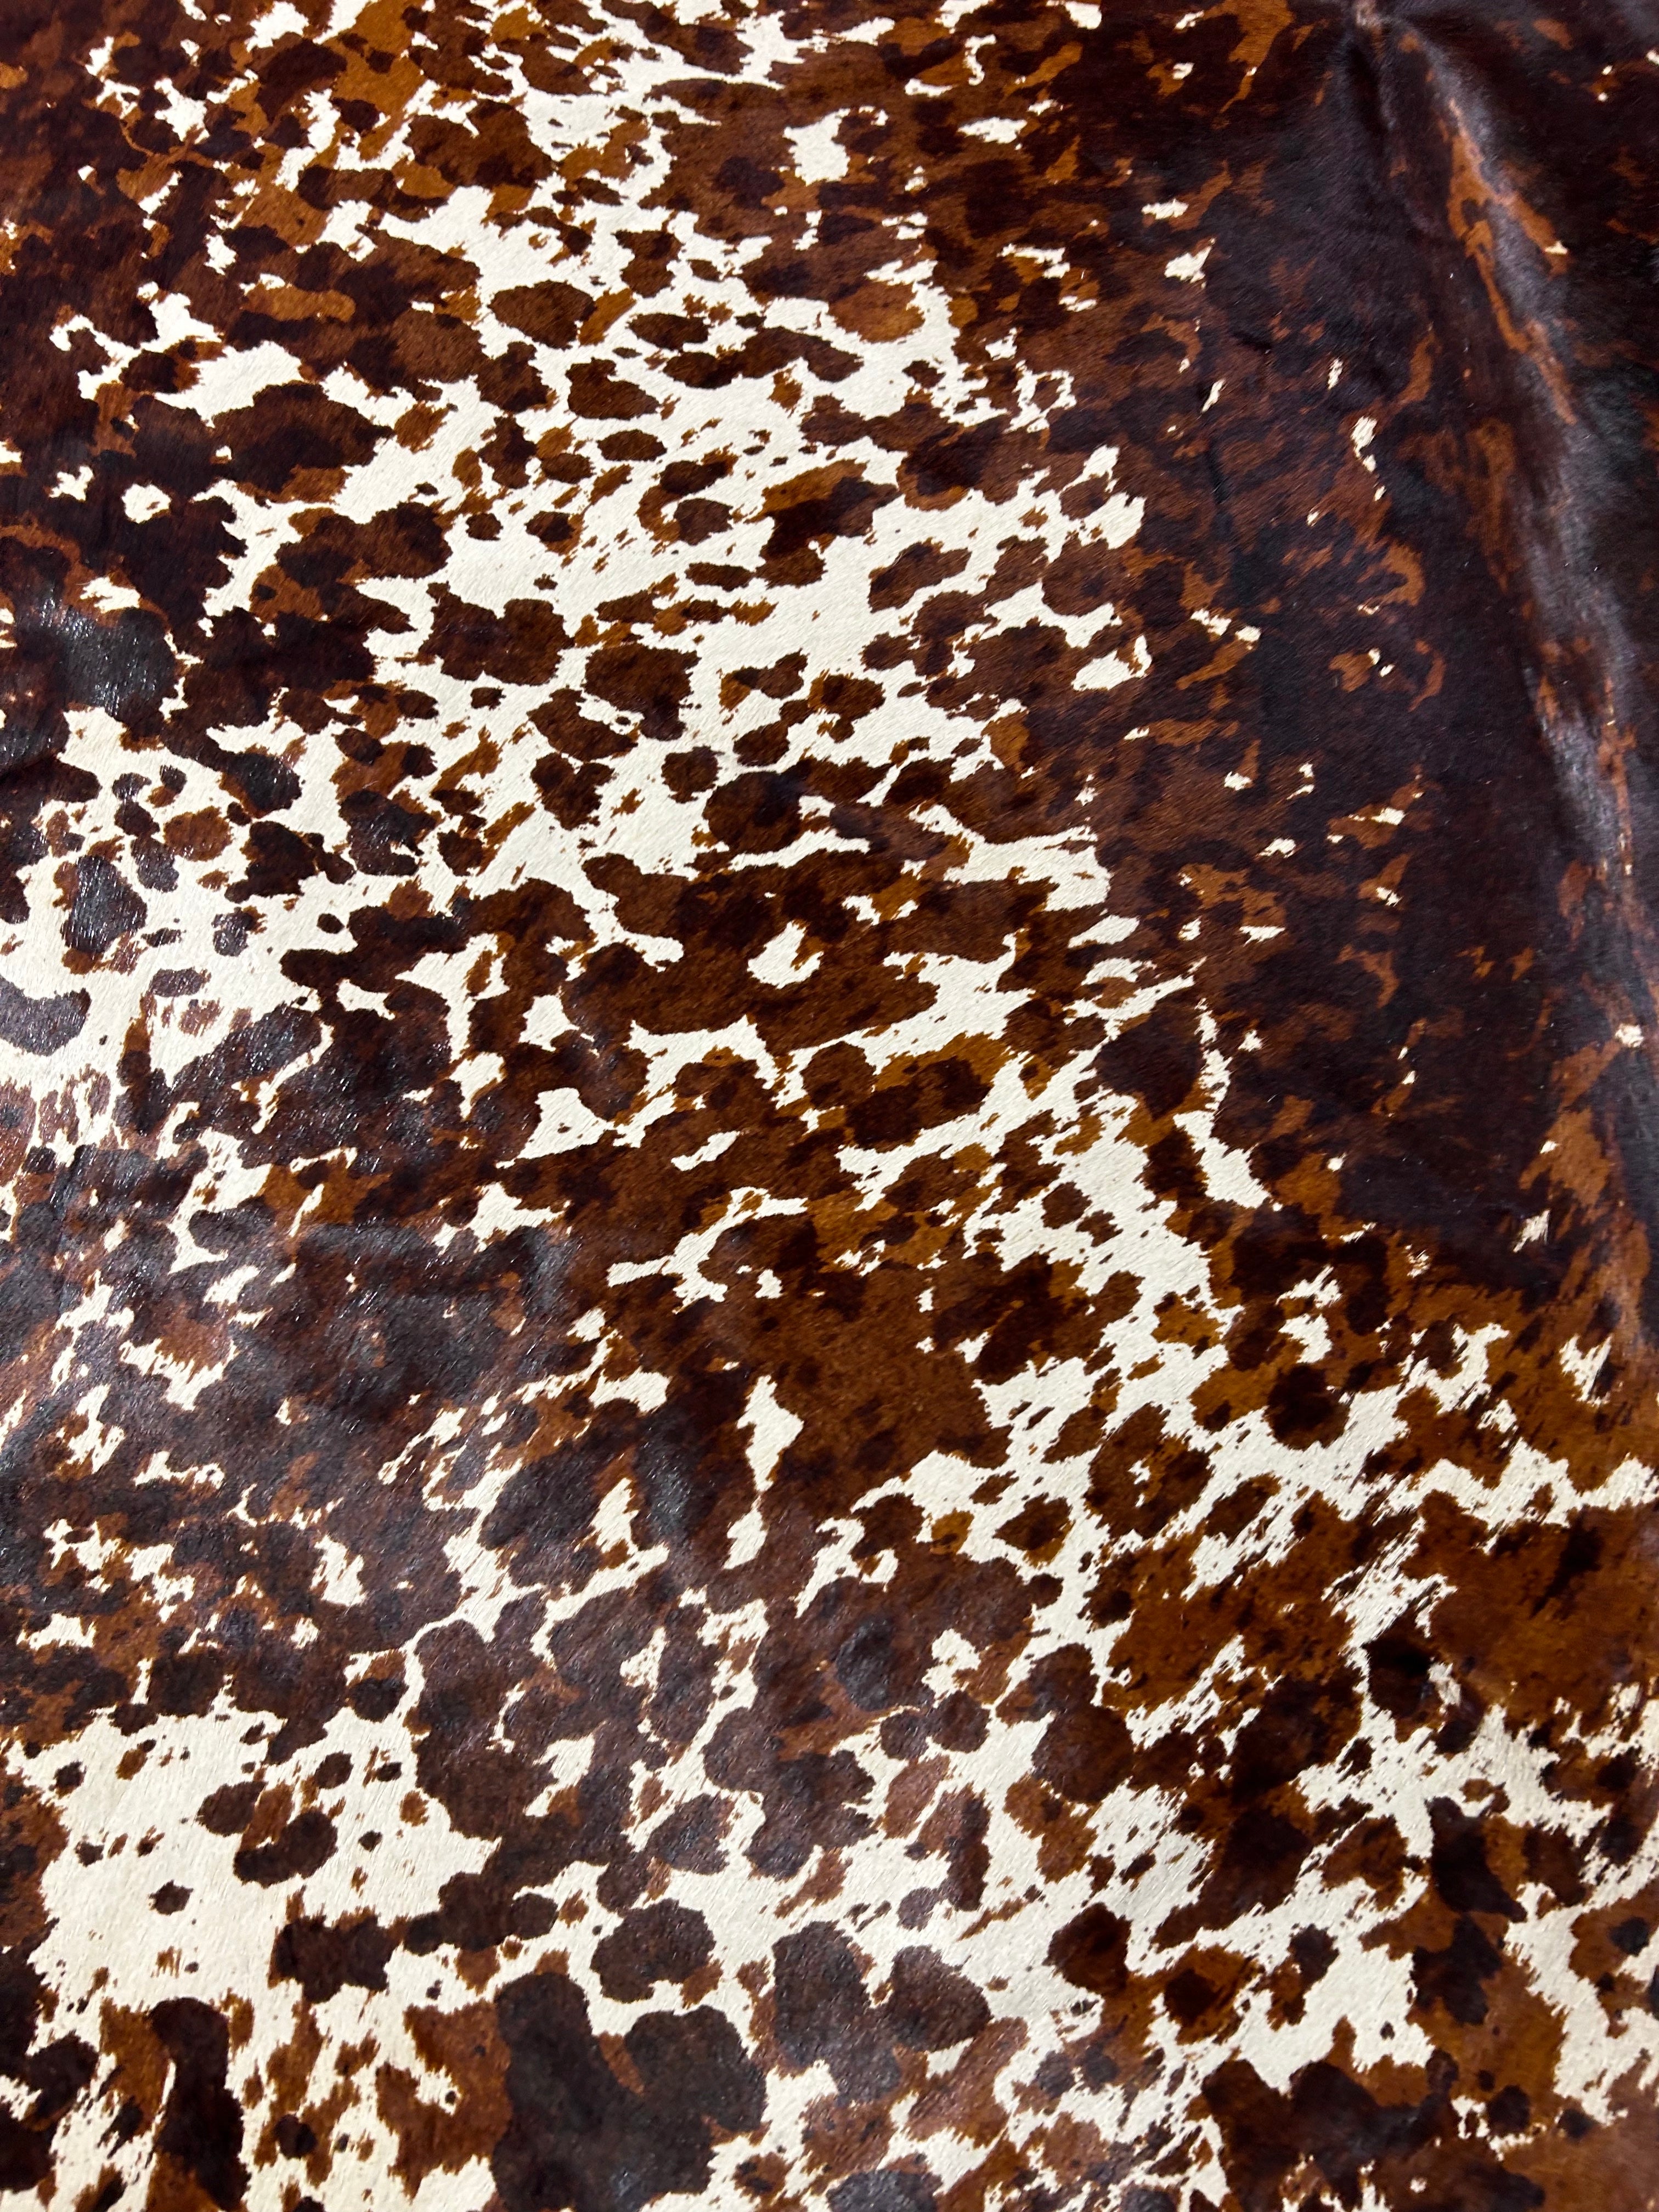 Speckled Tricolor Printed Cowhide Rug Size: 7.5x6.5 feet D-041